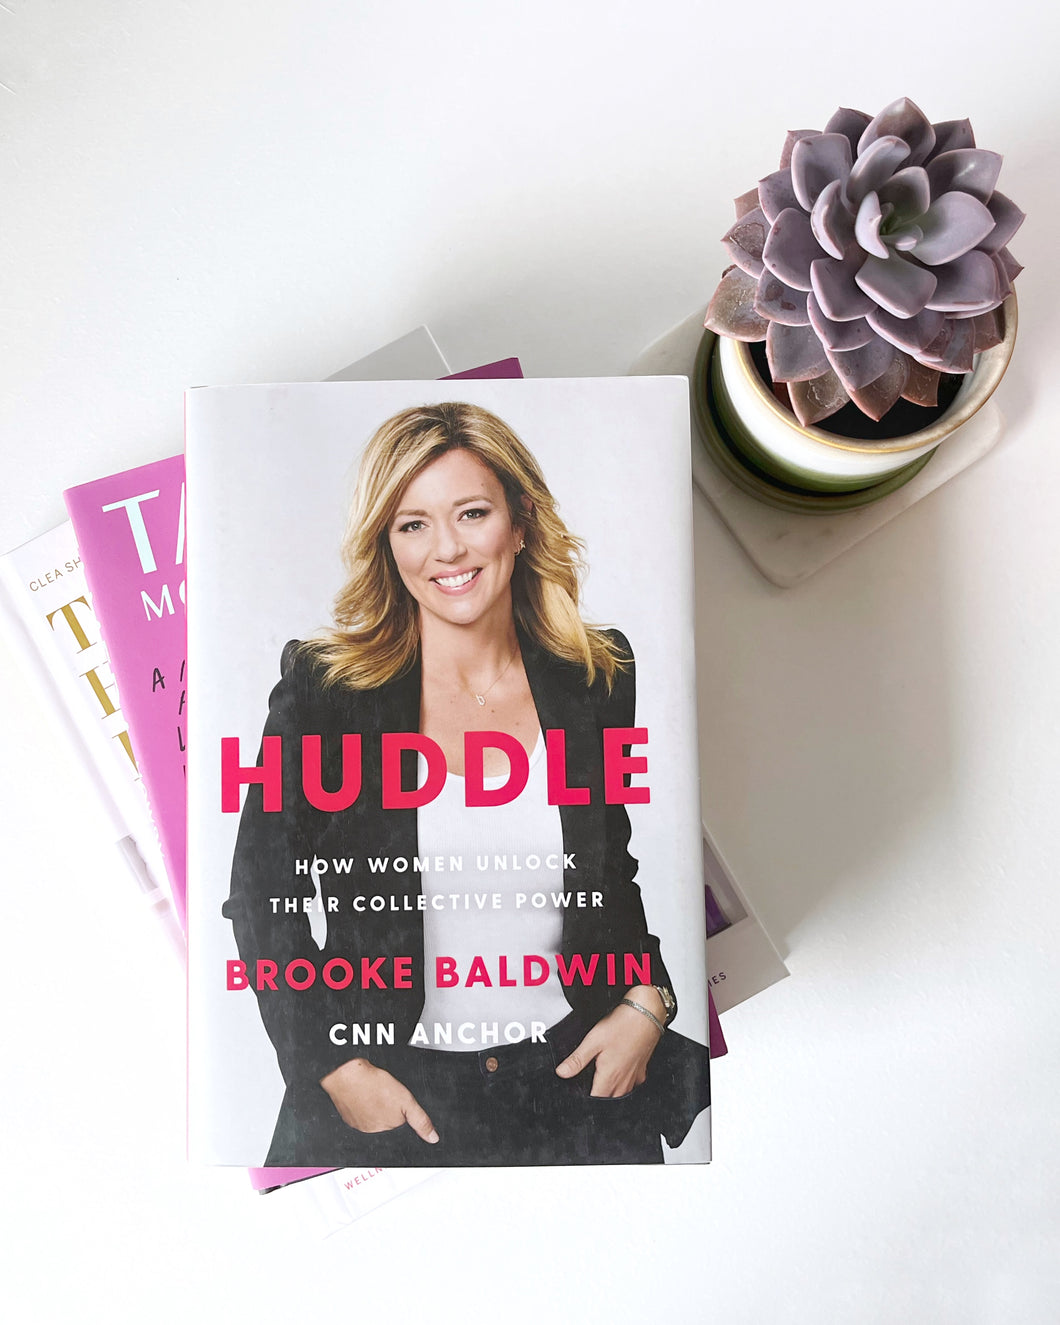 Huddle: How Women Unlock Their Collective Power by Brooke Baldwin